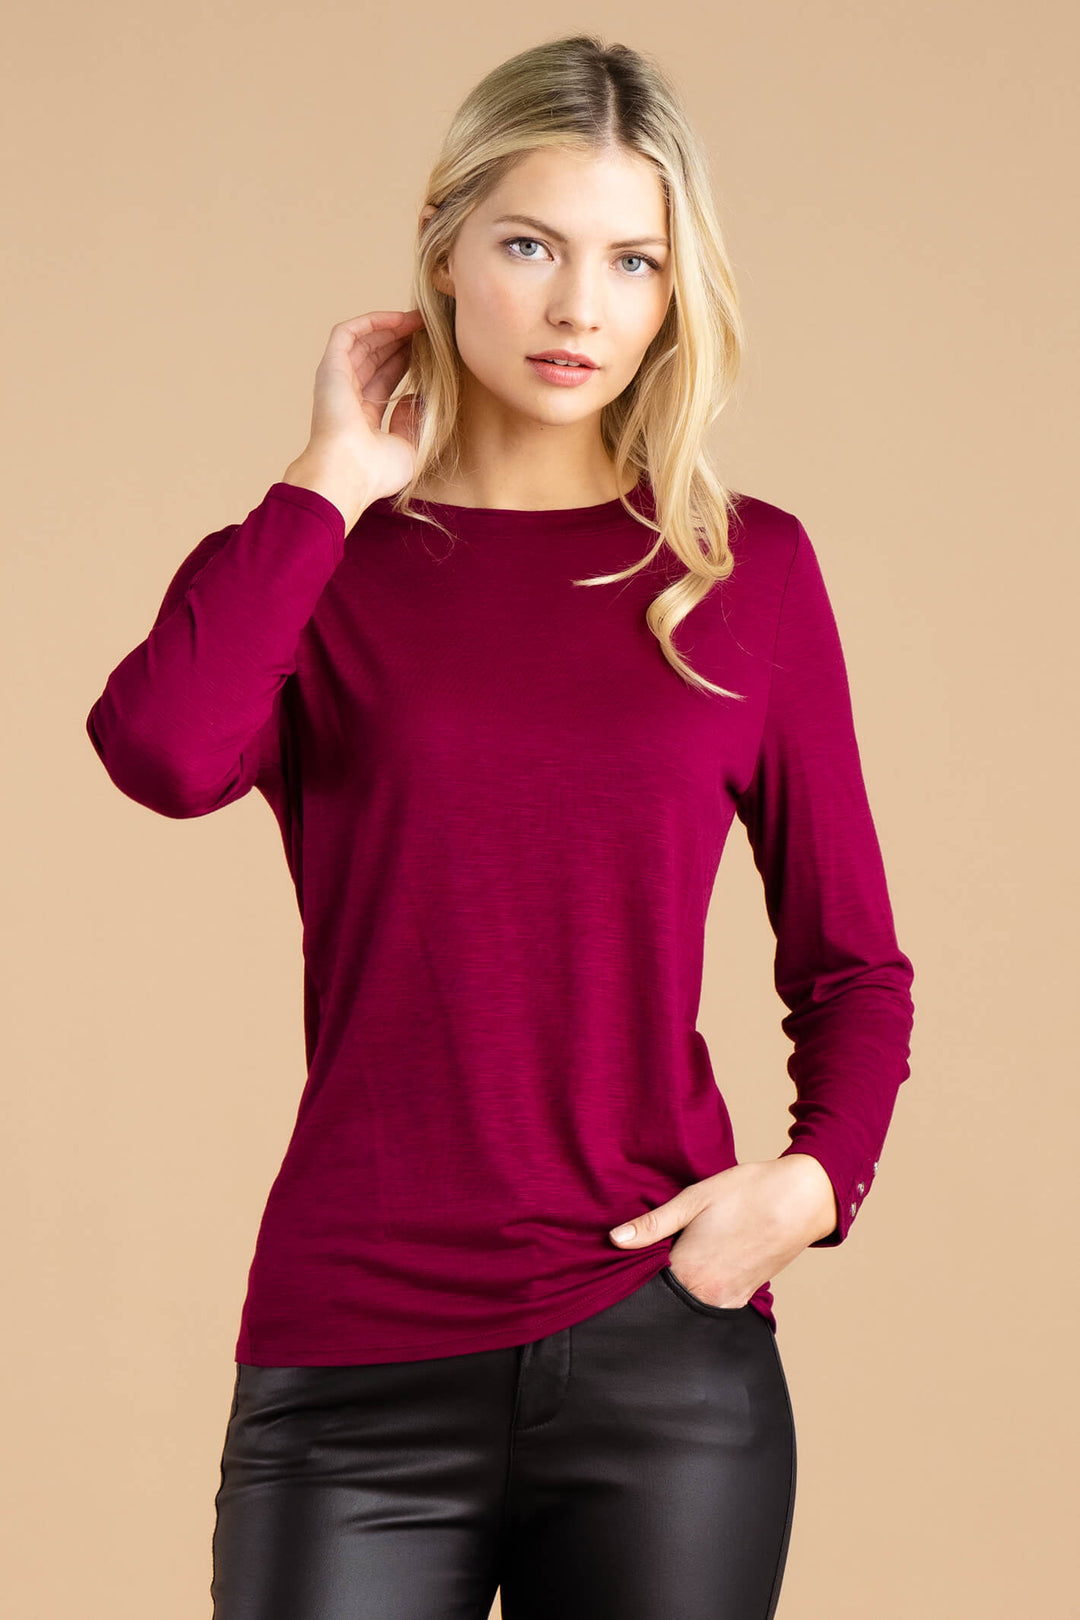 Marble Fashion 6401 205 Burgundy Red Long Sleeve Top - Experience Boutique